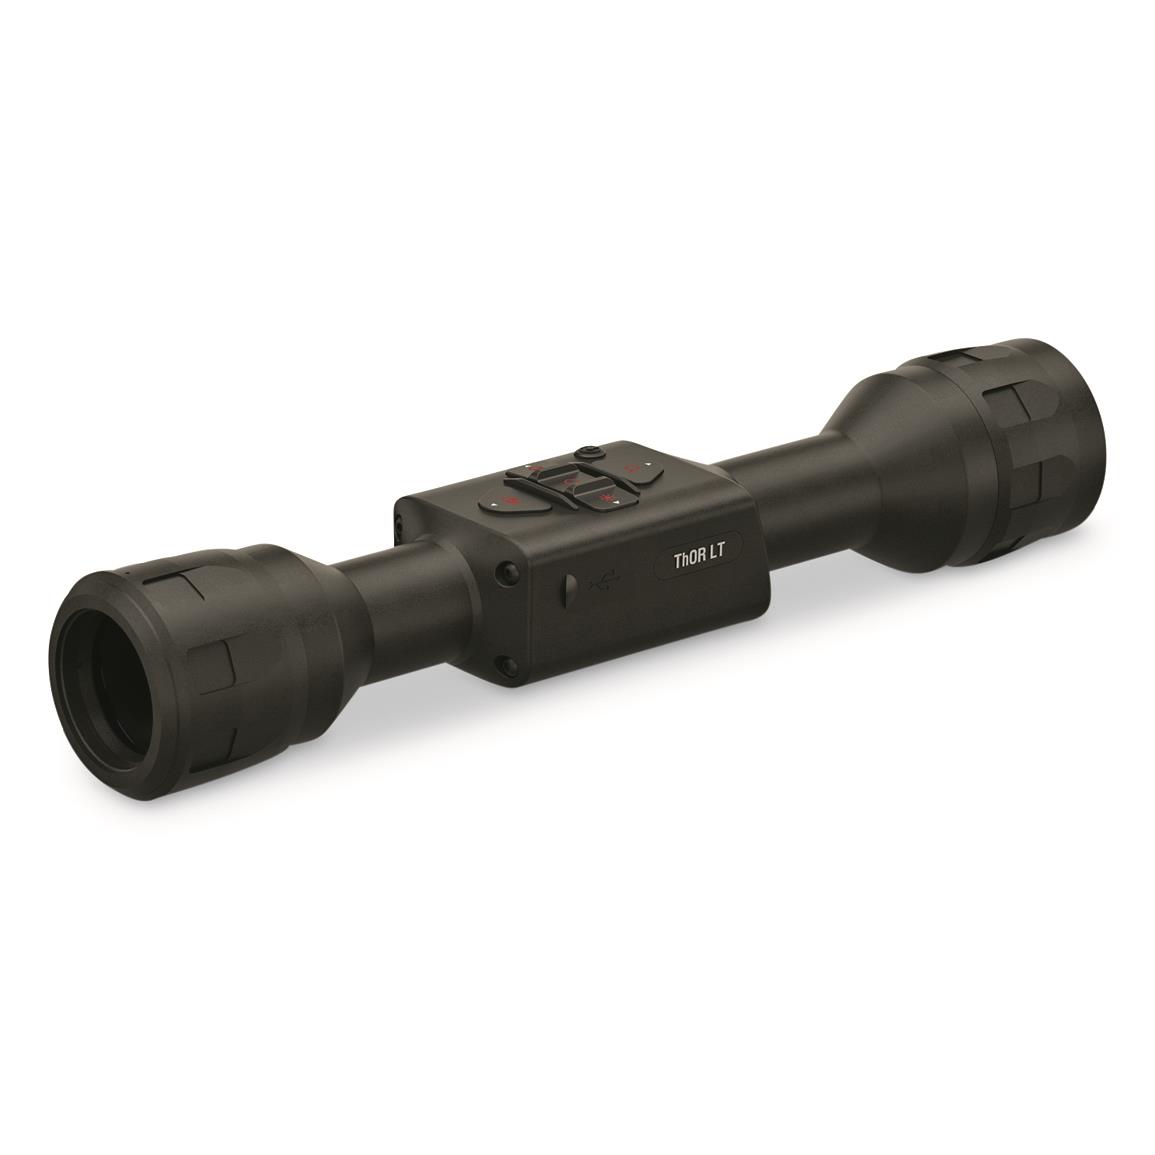 ATN ThOR LTV 160 5-15x Thermal Rifle Scope with Video Recording